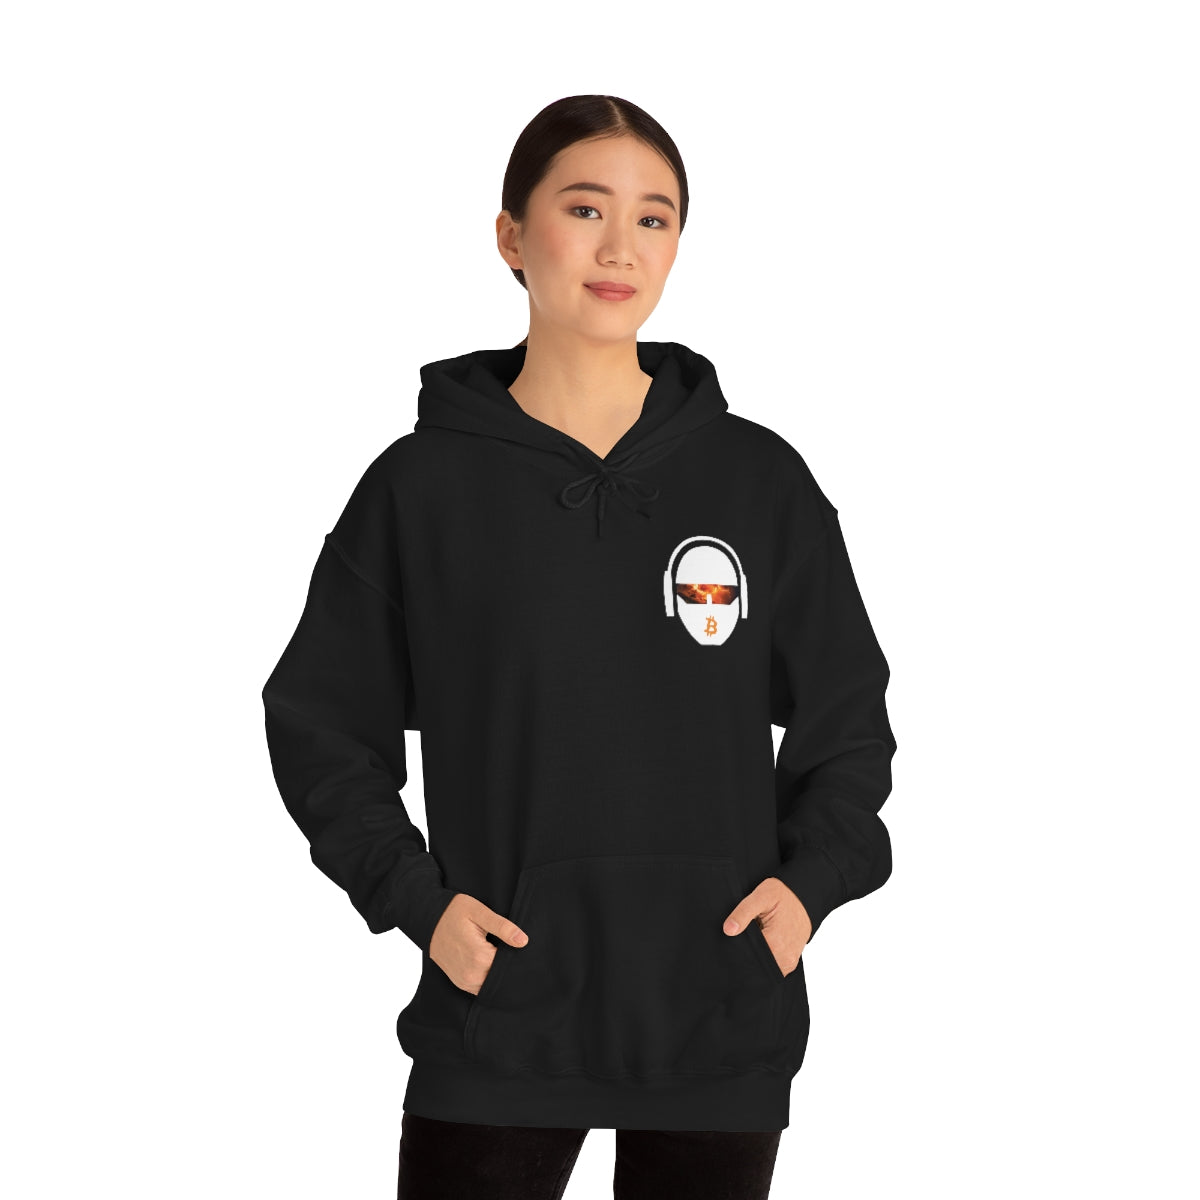 Bitcoin Breakout 7th Generation Thinking Pullover Hoodie